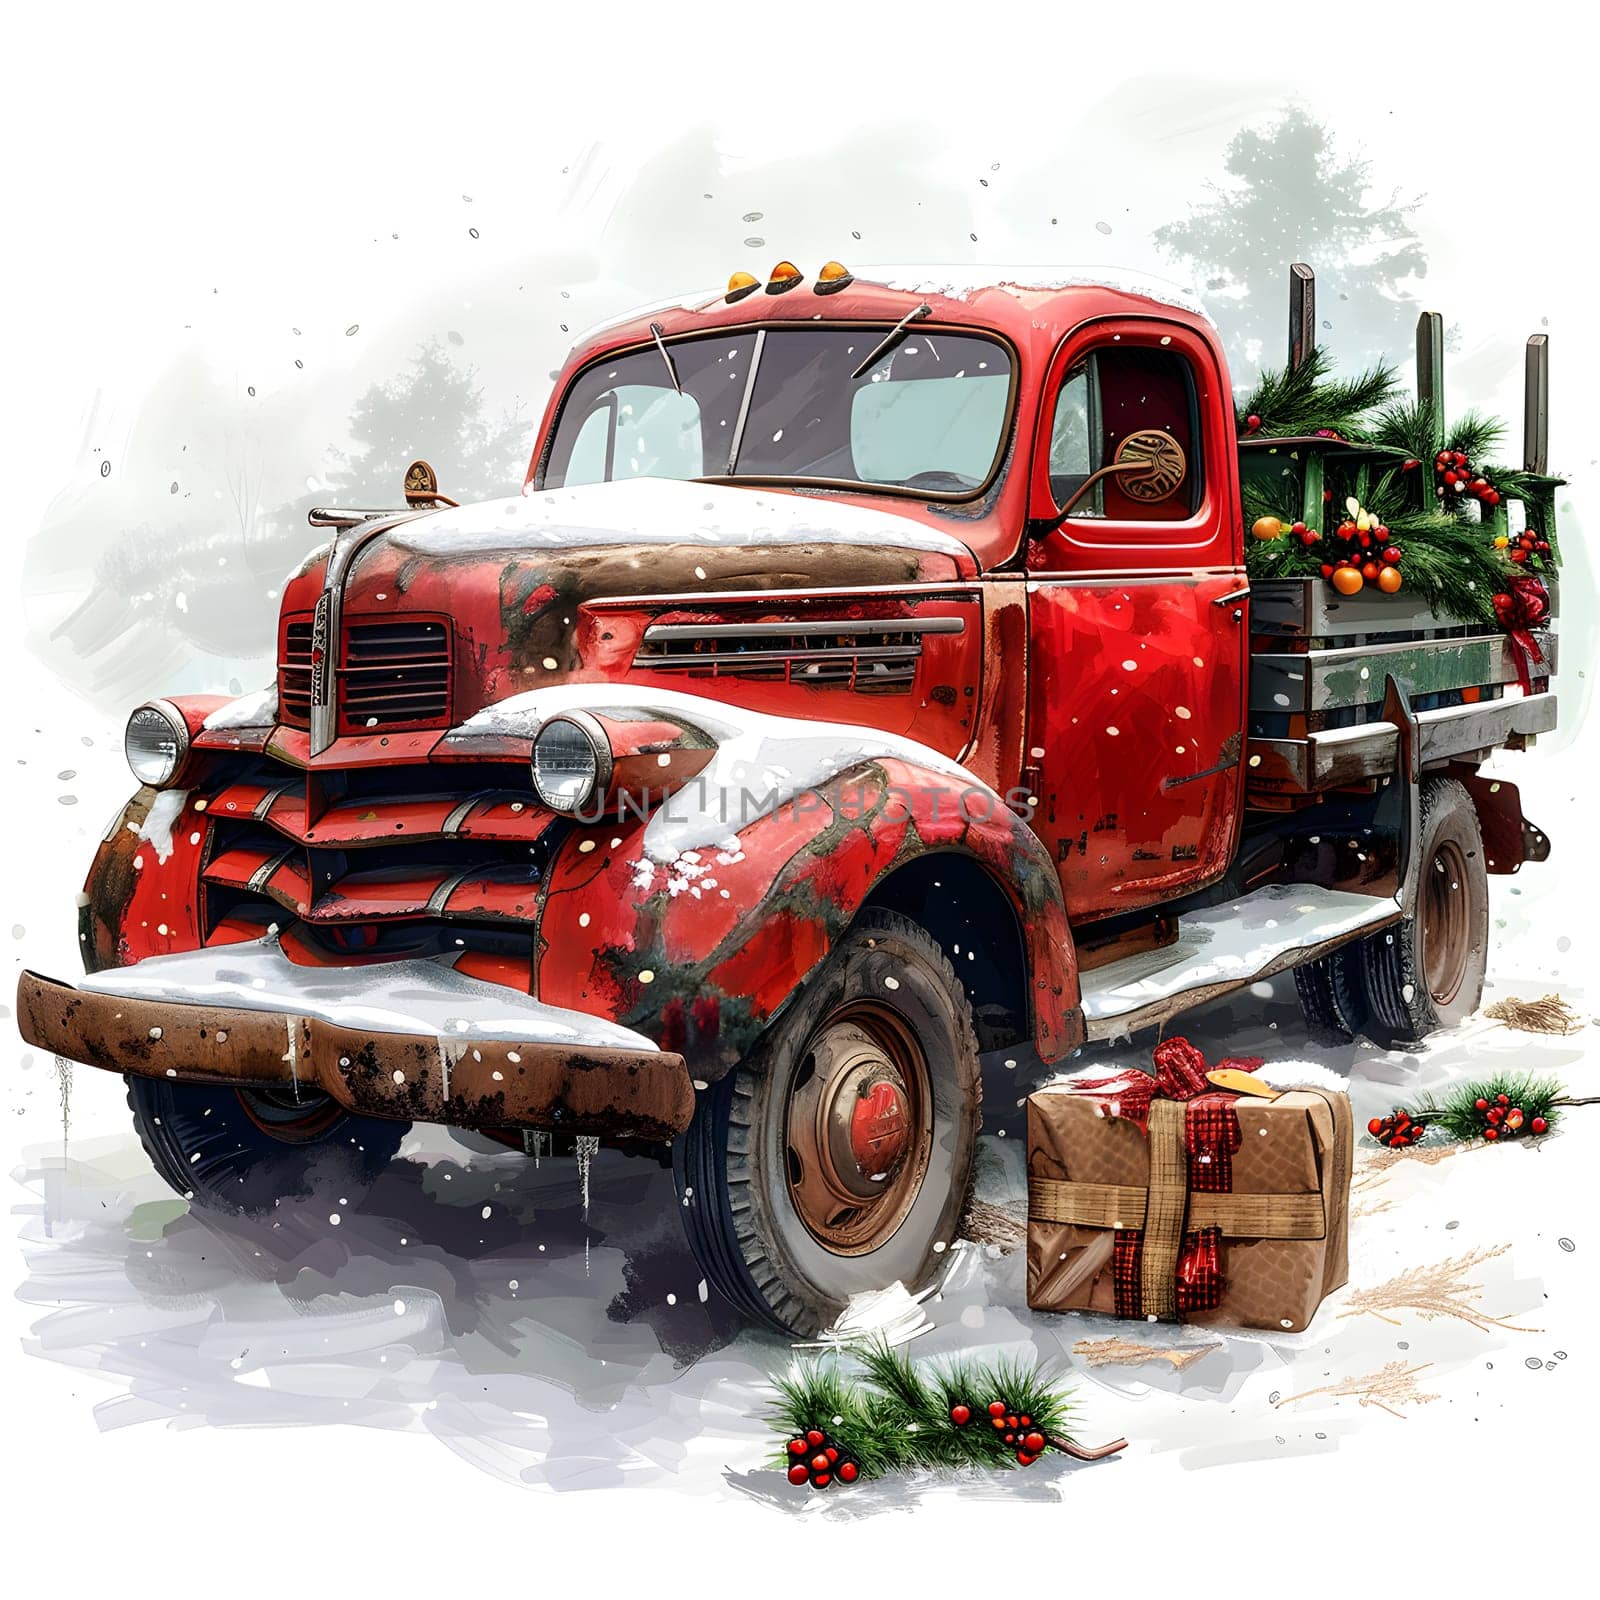 Red truck with Christmas tree in back driving through snow by Nadtochiy